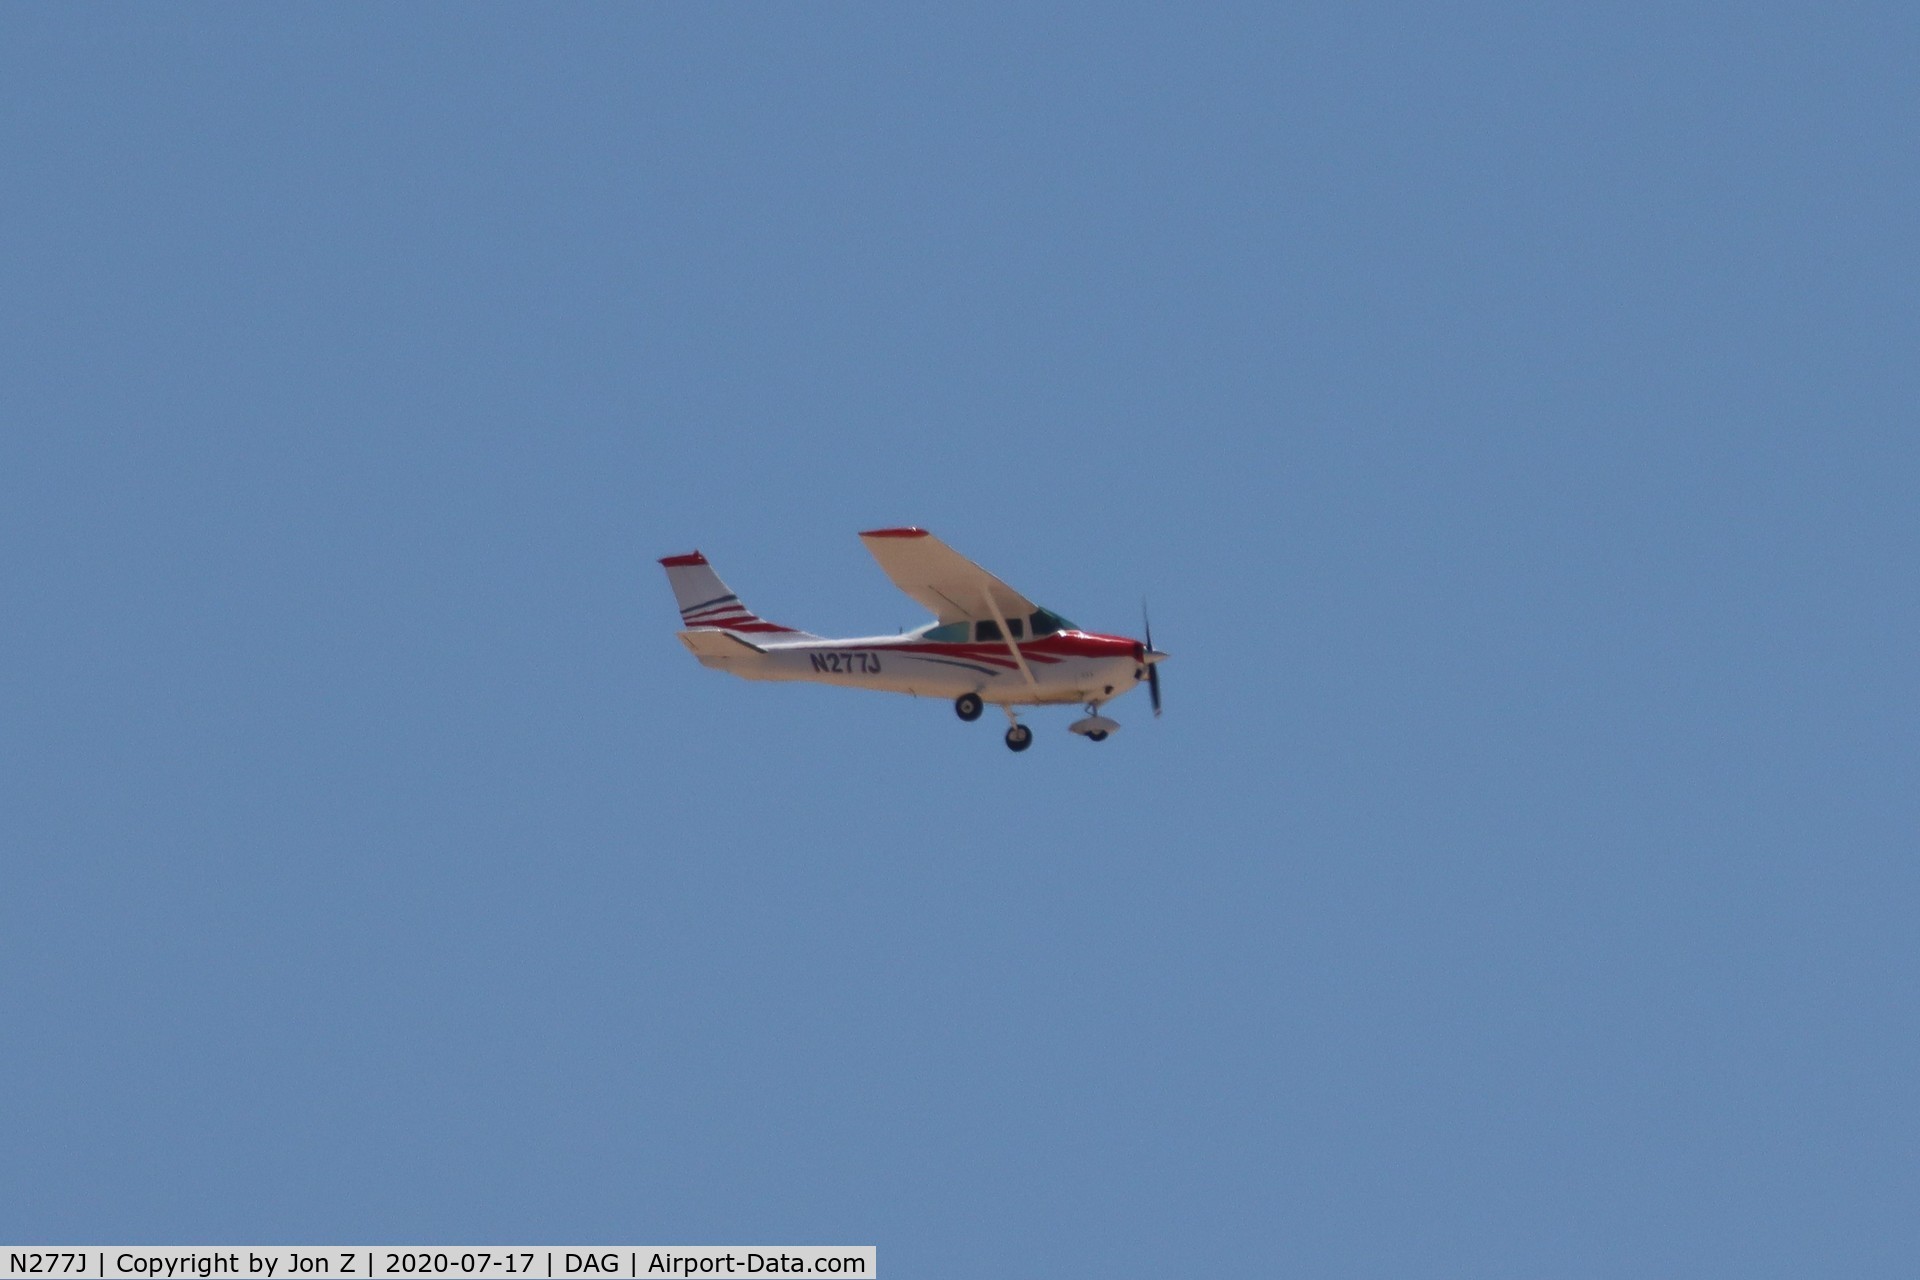 N277J, 1968 Cessna 182L Skylane C/N 18259292, flying west from DAG.  Flies over my work giving us a show every so many days.  Finally got a pic to share.